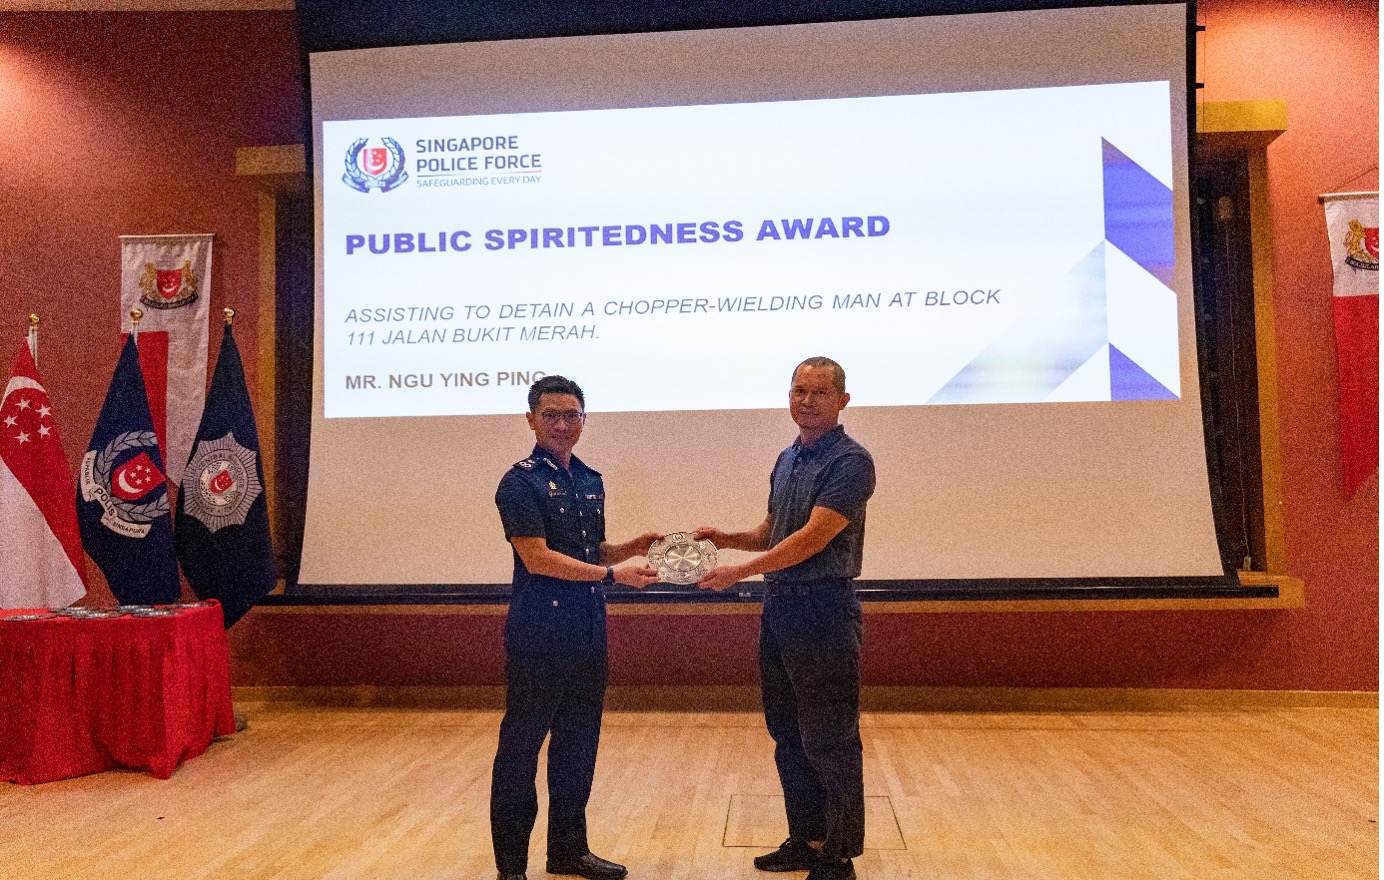 20220818_eleven_members_of_the_public_presented_with_public_spiritedness_award1